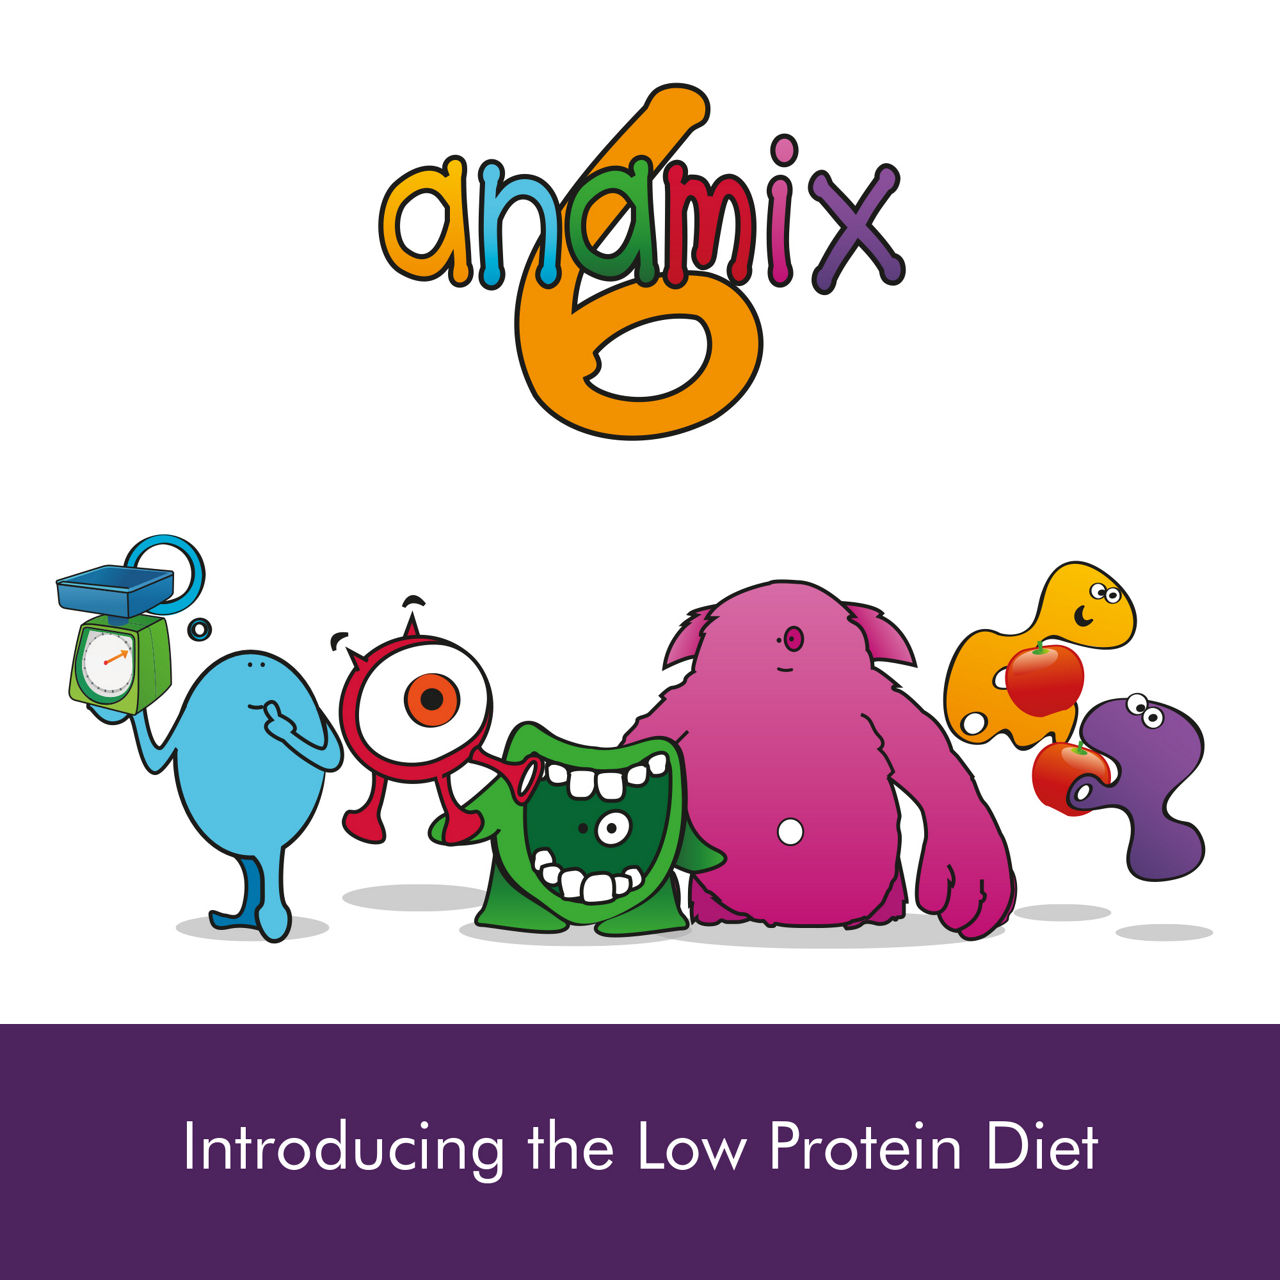 Anamix 6Introducing the Low Protein Diet 